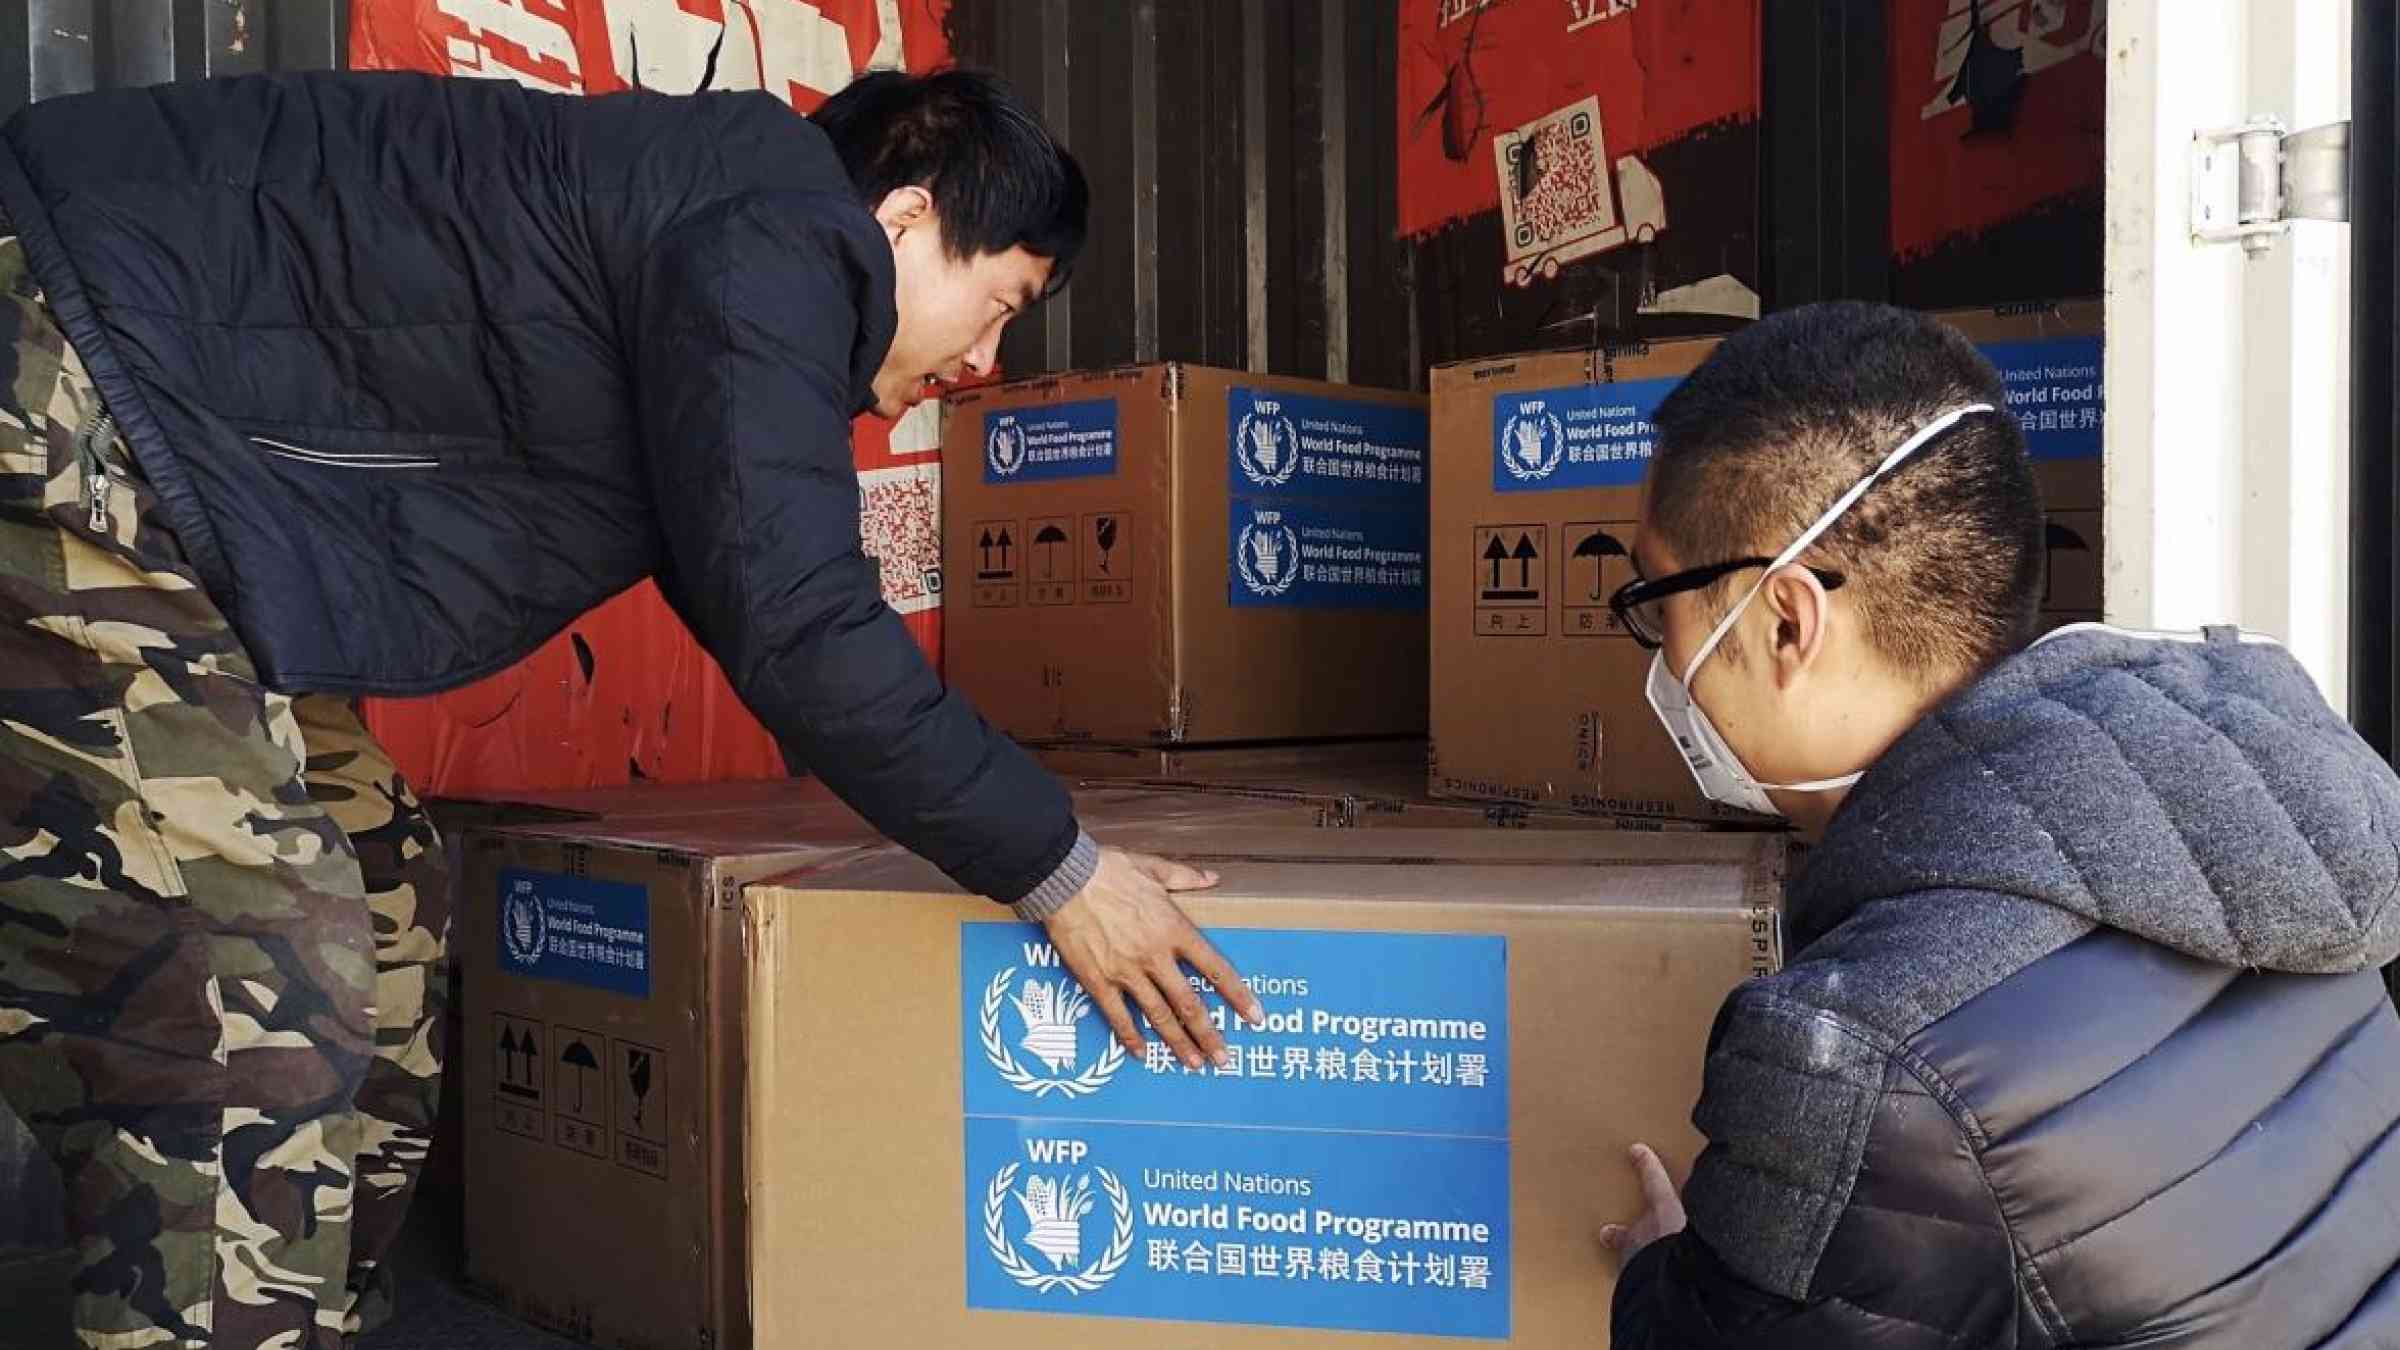 The first batch of WFP supplies, including 50 sets of non-invasive ventilators, reach Wuhan. Photo courtesy of Yingshi Zhang